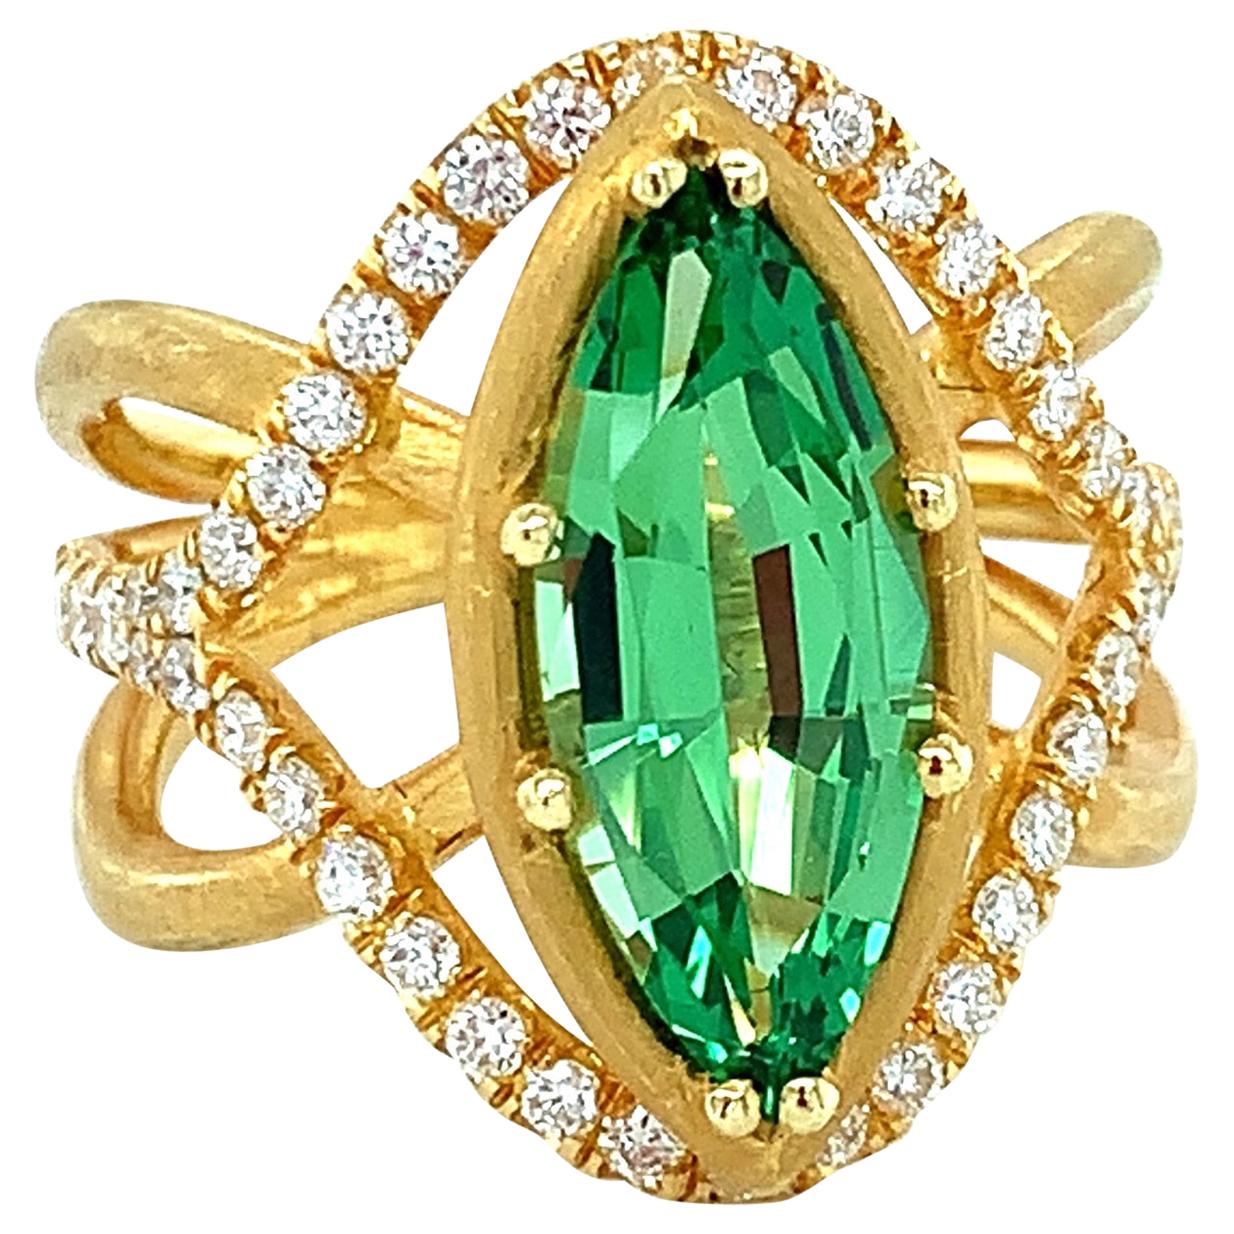 Tsavorite Garnet and Diamond Cocktail Ring in Yellow Gold, 2.95 Carats For Sale